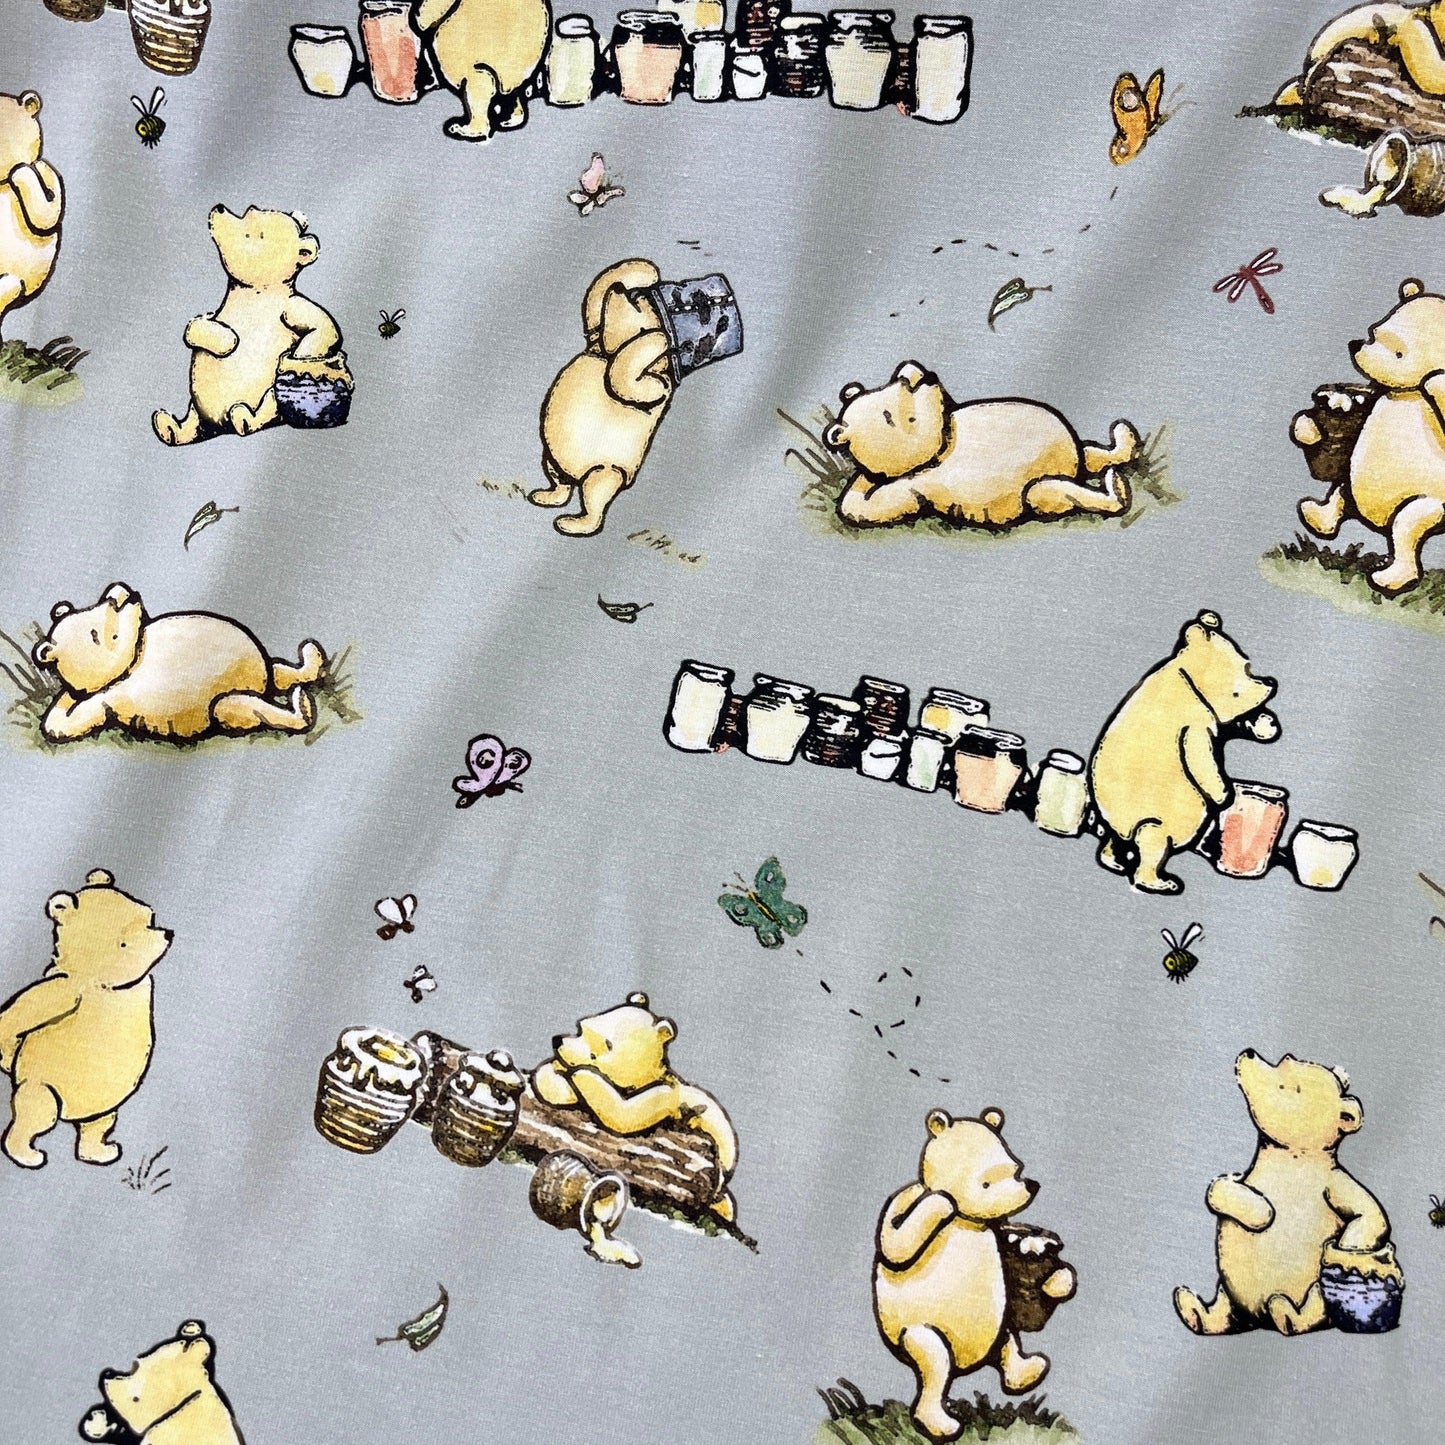 Winnie the Pooh and Honey Pots on Green Bamboo/Spandex Jersey Fabric - Nature's Fabrics